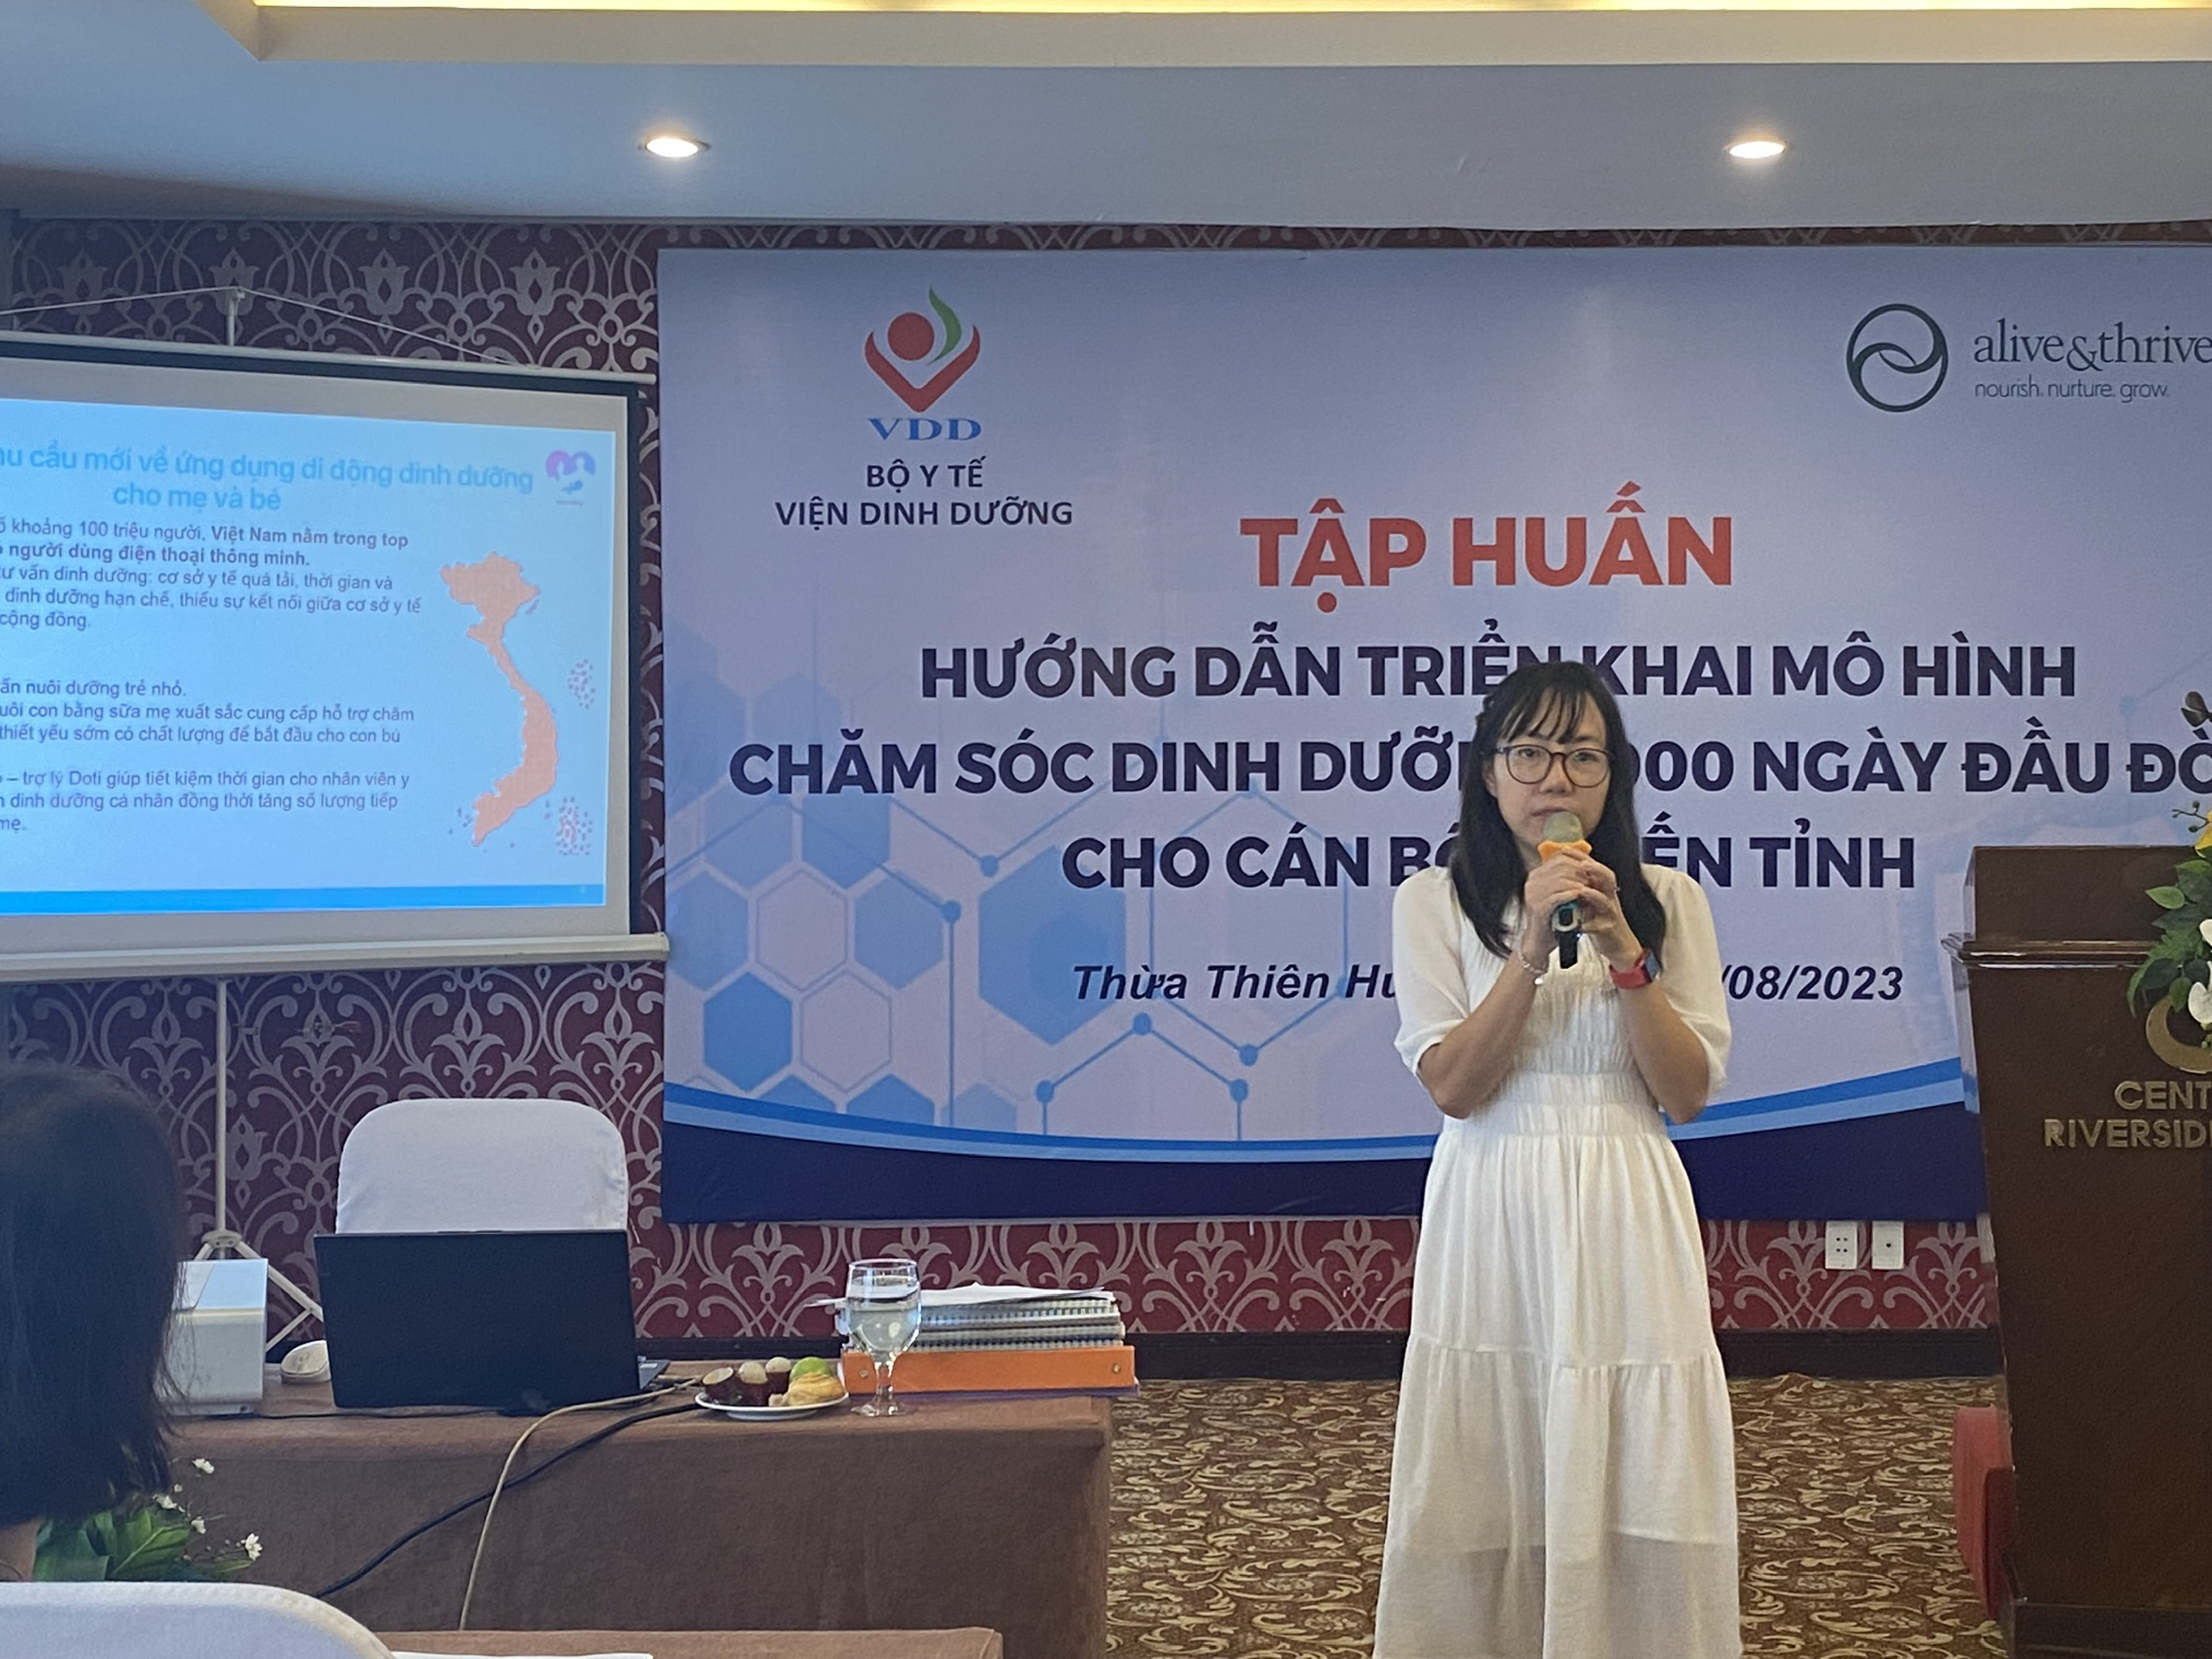 hinh-anh-momby-chinh-thuc-duoc-vien-dinh-duong-quoc-gia-viet-nam-gioi-thieu-den-cac-can-bo-y-te-39-tinh-thanh-442-6